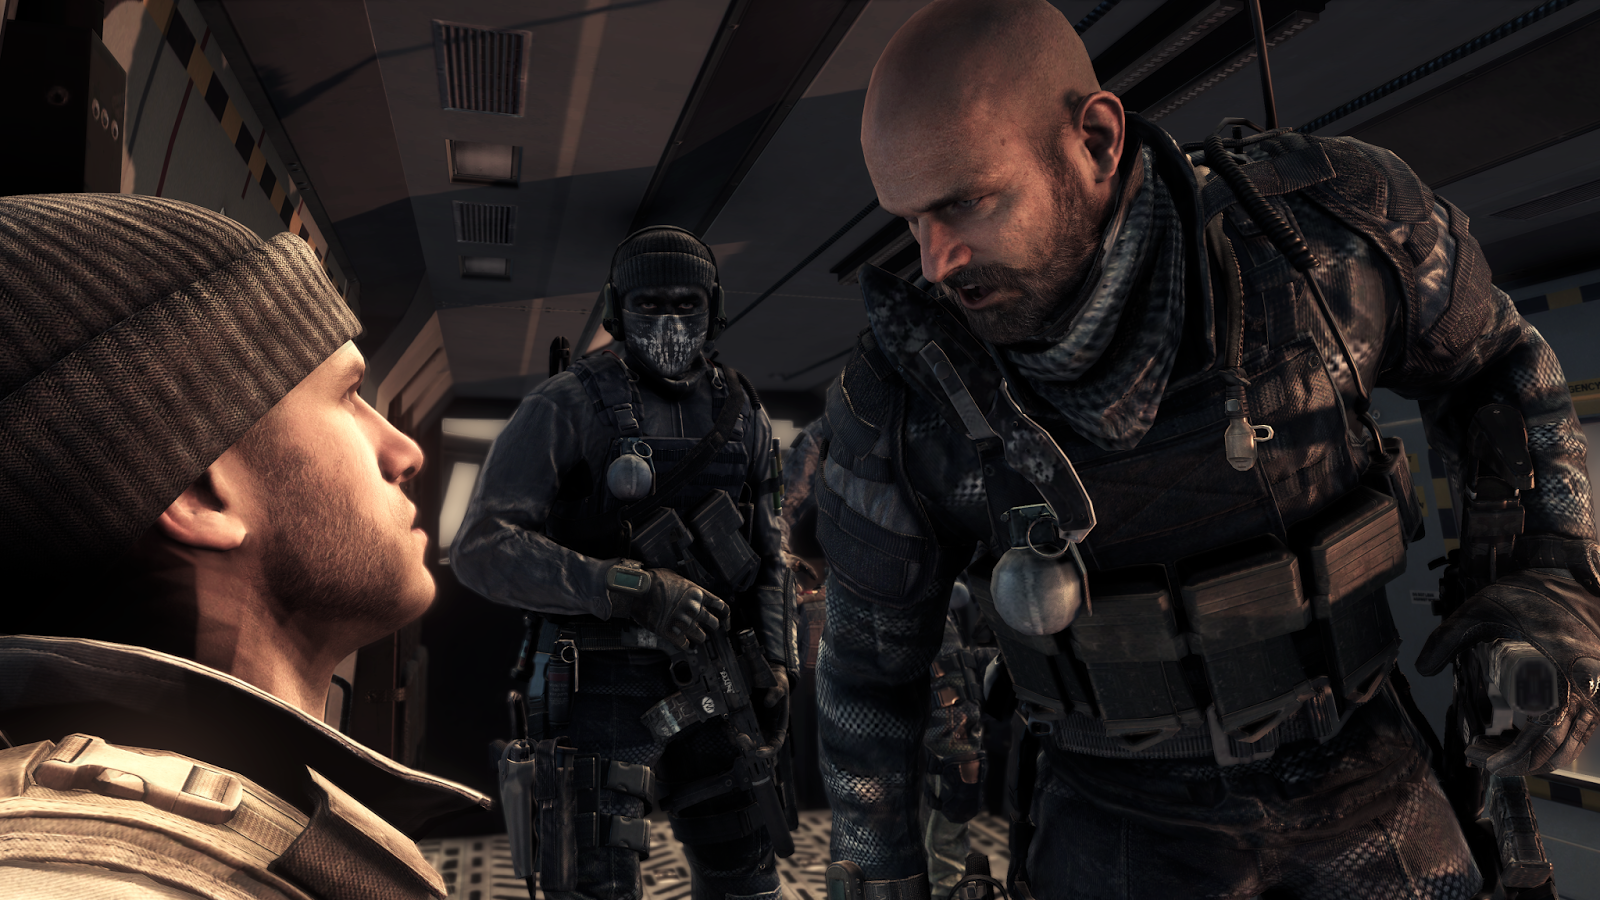 Call of Duty: Ghosts review: for the dead